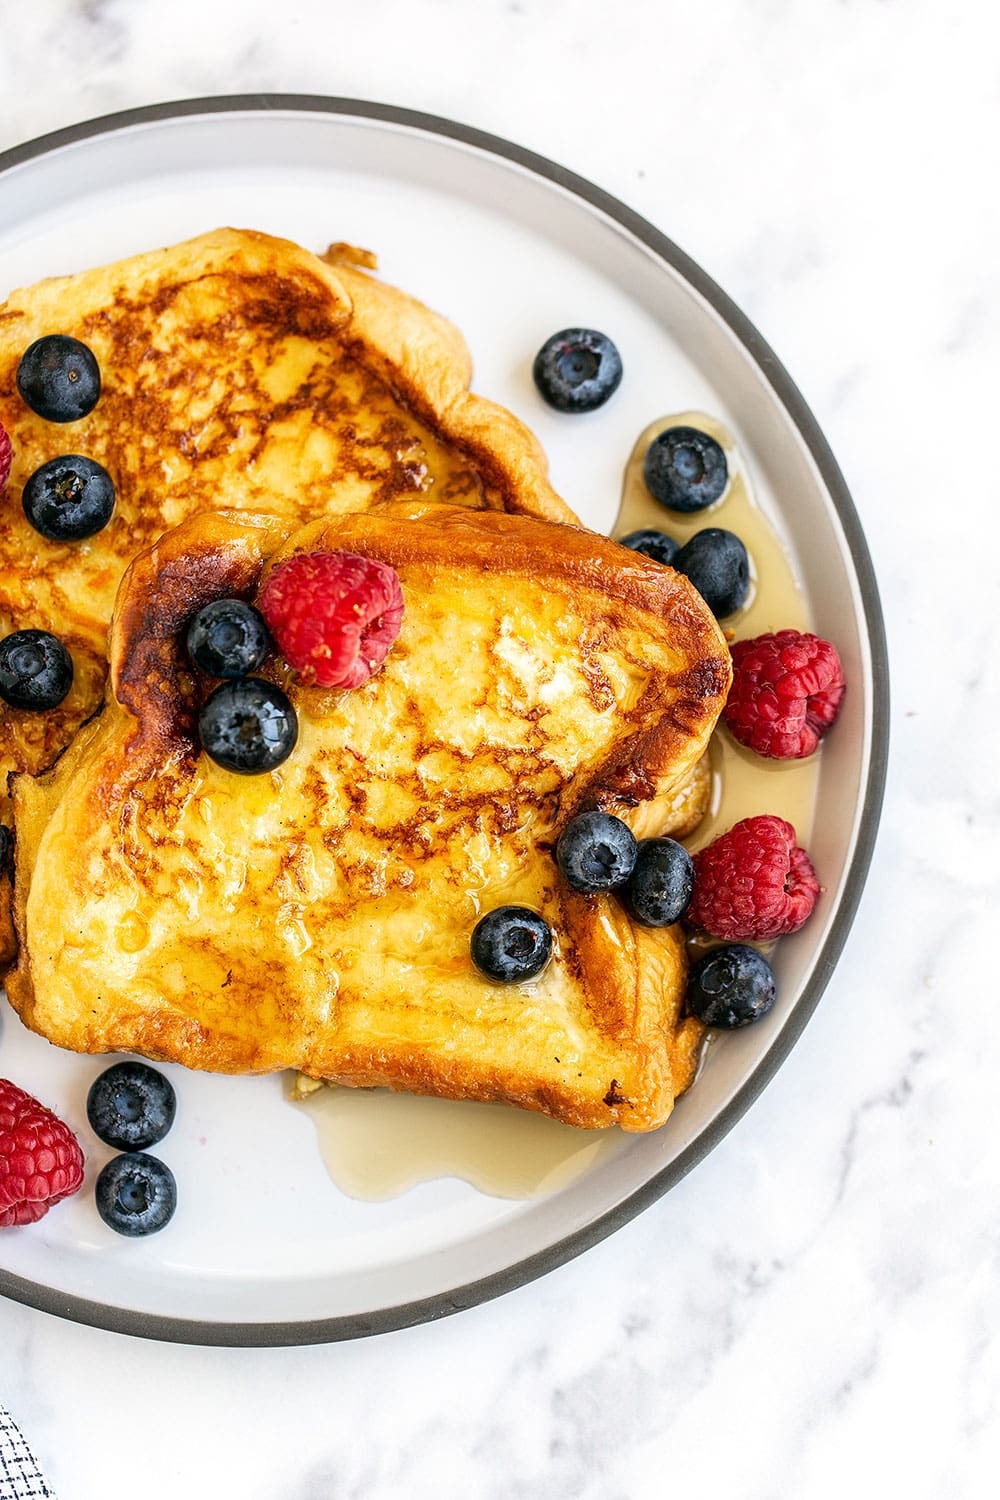 Two slices of French toast on a plate with maple syrup and berries